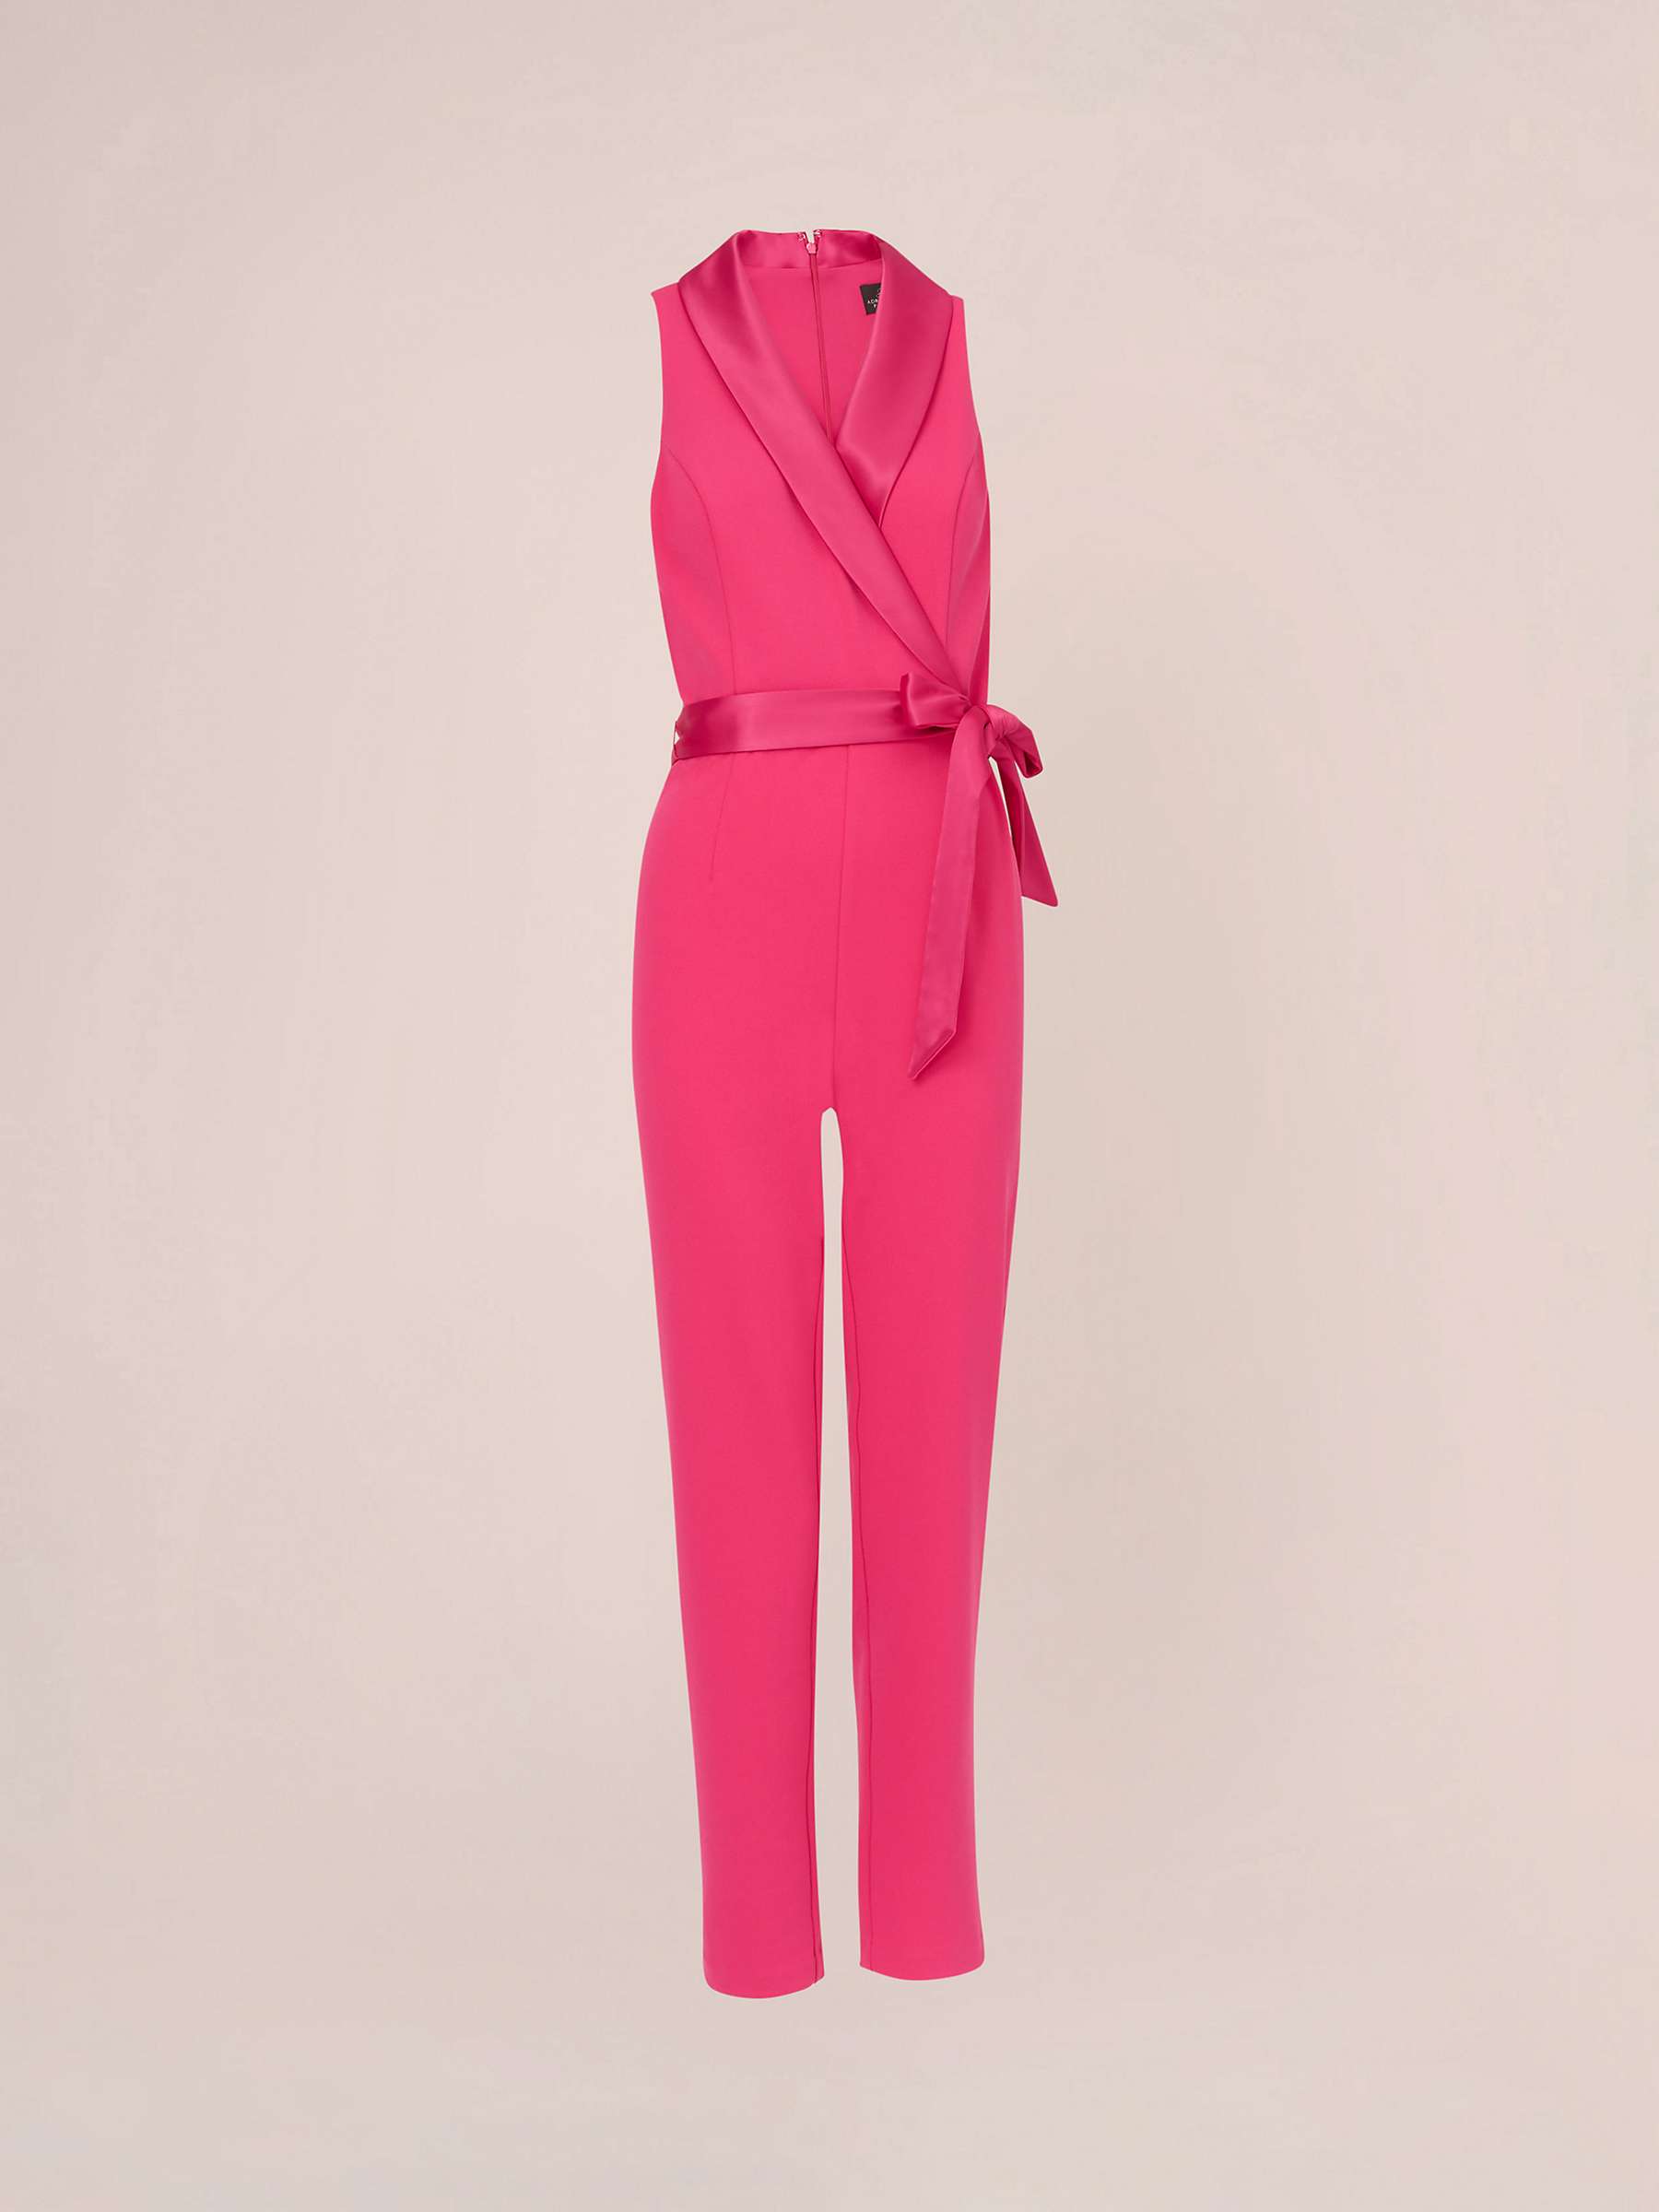 Buy Adrianna Papell Knit Crepe Tuxedo Jumpsuit, Cabaret Pink Online at johnlewis.com